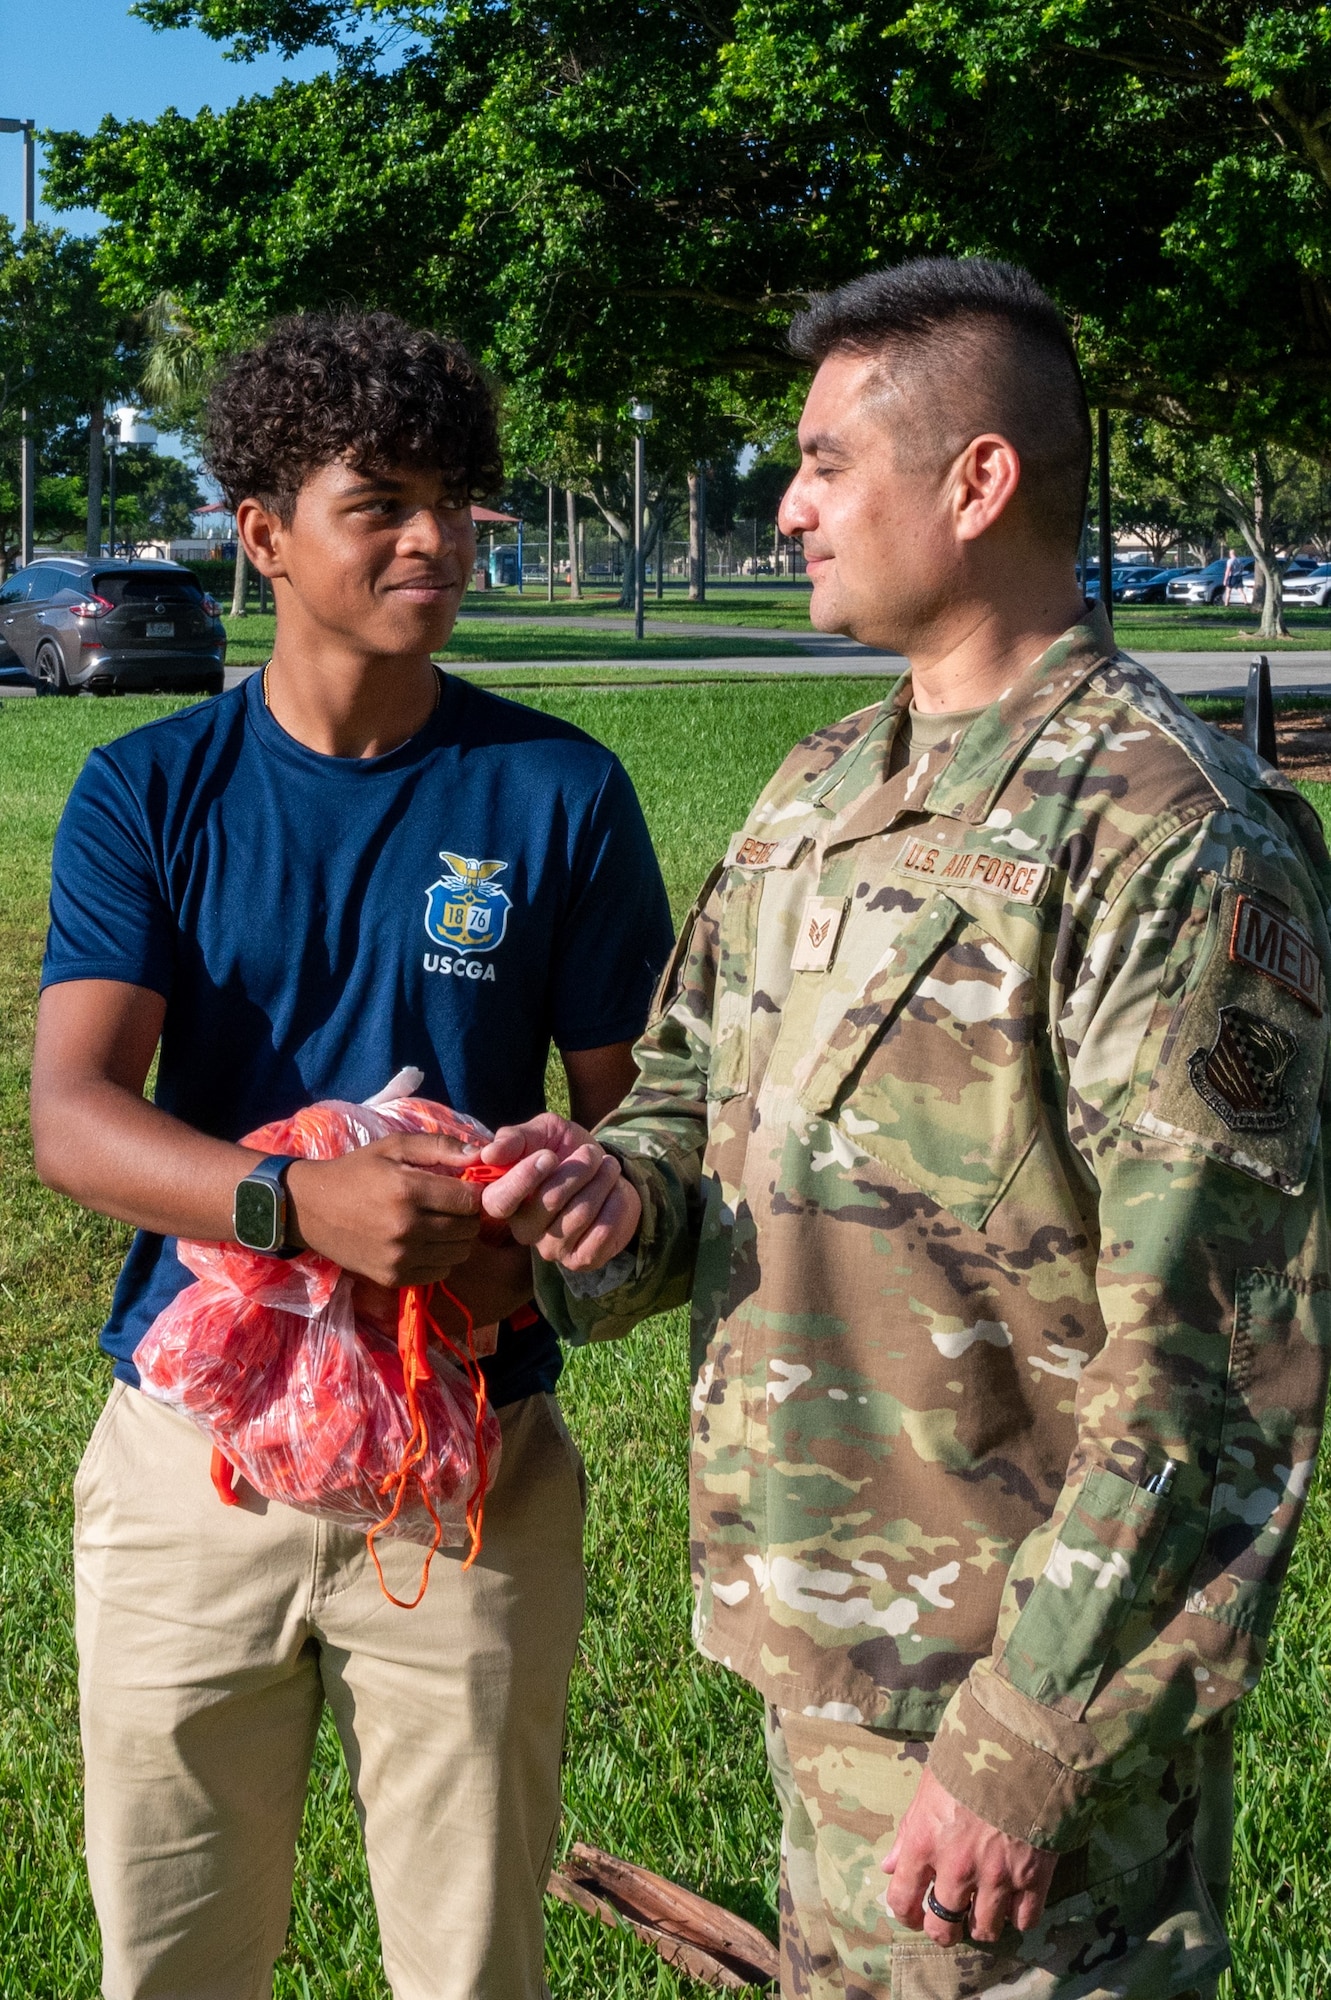 David Frazer of East Lyme High School, Connecticut, hands water safety whistles to Staff Sgt. Leonardo Perez of the 482d Medical Squadron at Homestead Air Reserve Base, Florida, September 9, 2023. The initiative underscores rising water safety concerns amid national heatwaves and the recent tragic drowning of two Airmen in June. (U.S. Air Force photo/Tech. Sgt. Paul Cook)